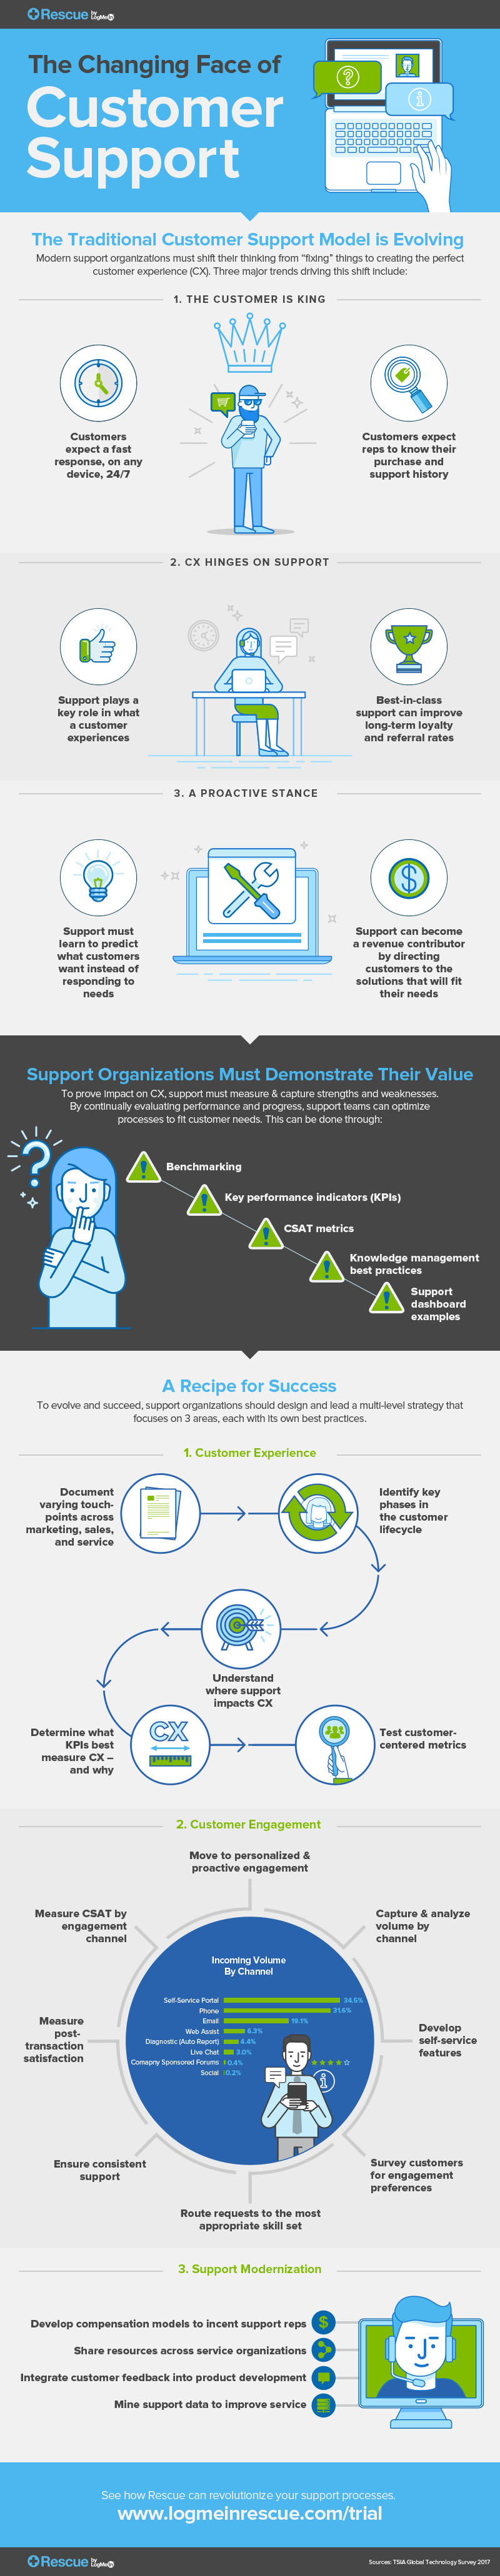 infographic-idg-changing-the-face-of-customer-support